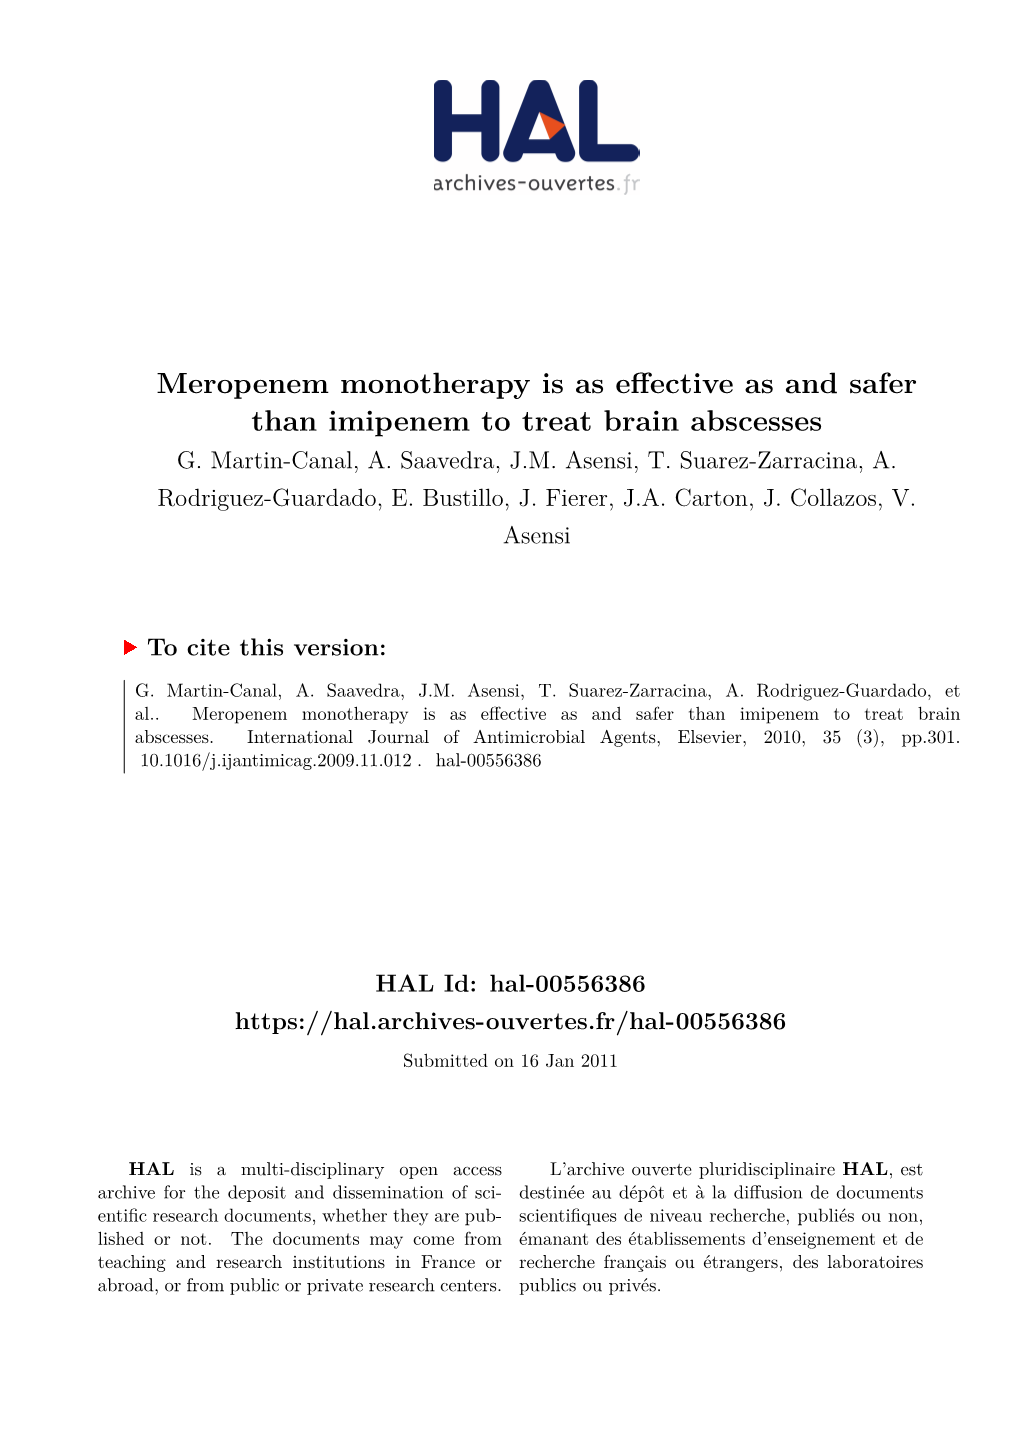 Meropenem Monotherapy Is As Effective As and Safer Than Imipenem to Treat Brain Abscesses G